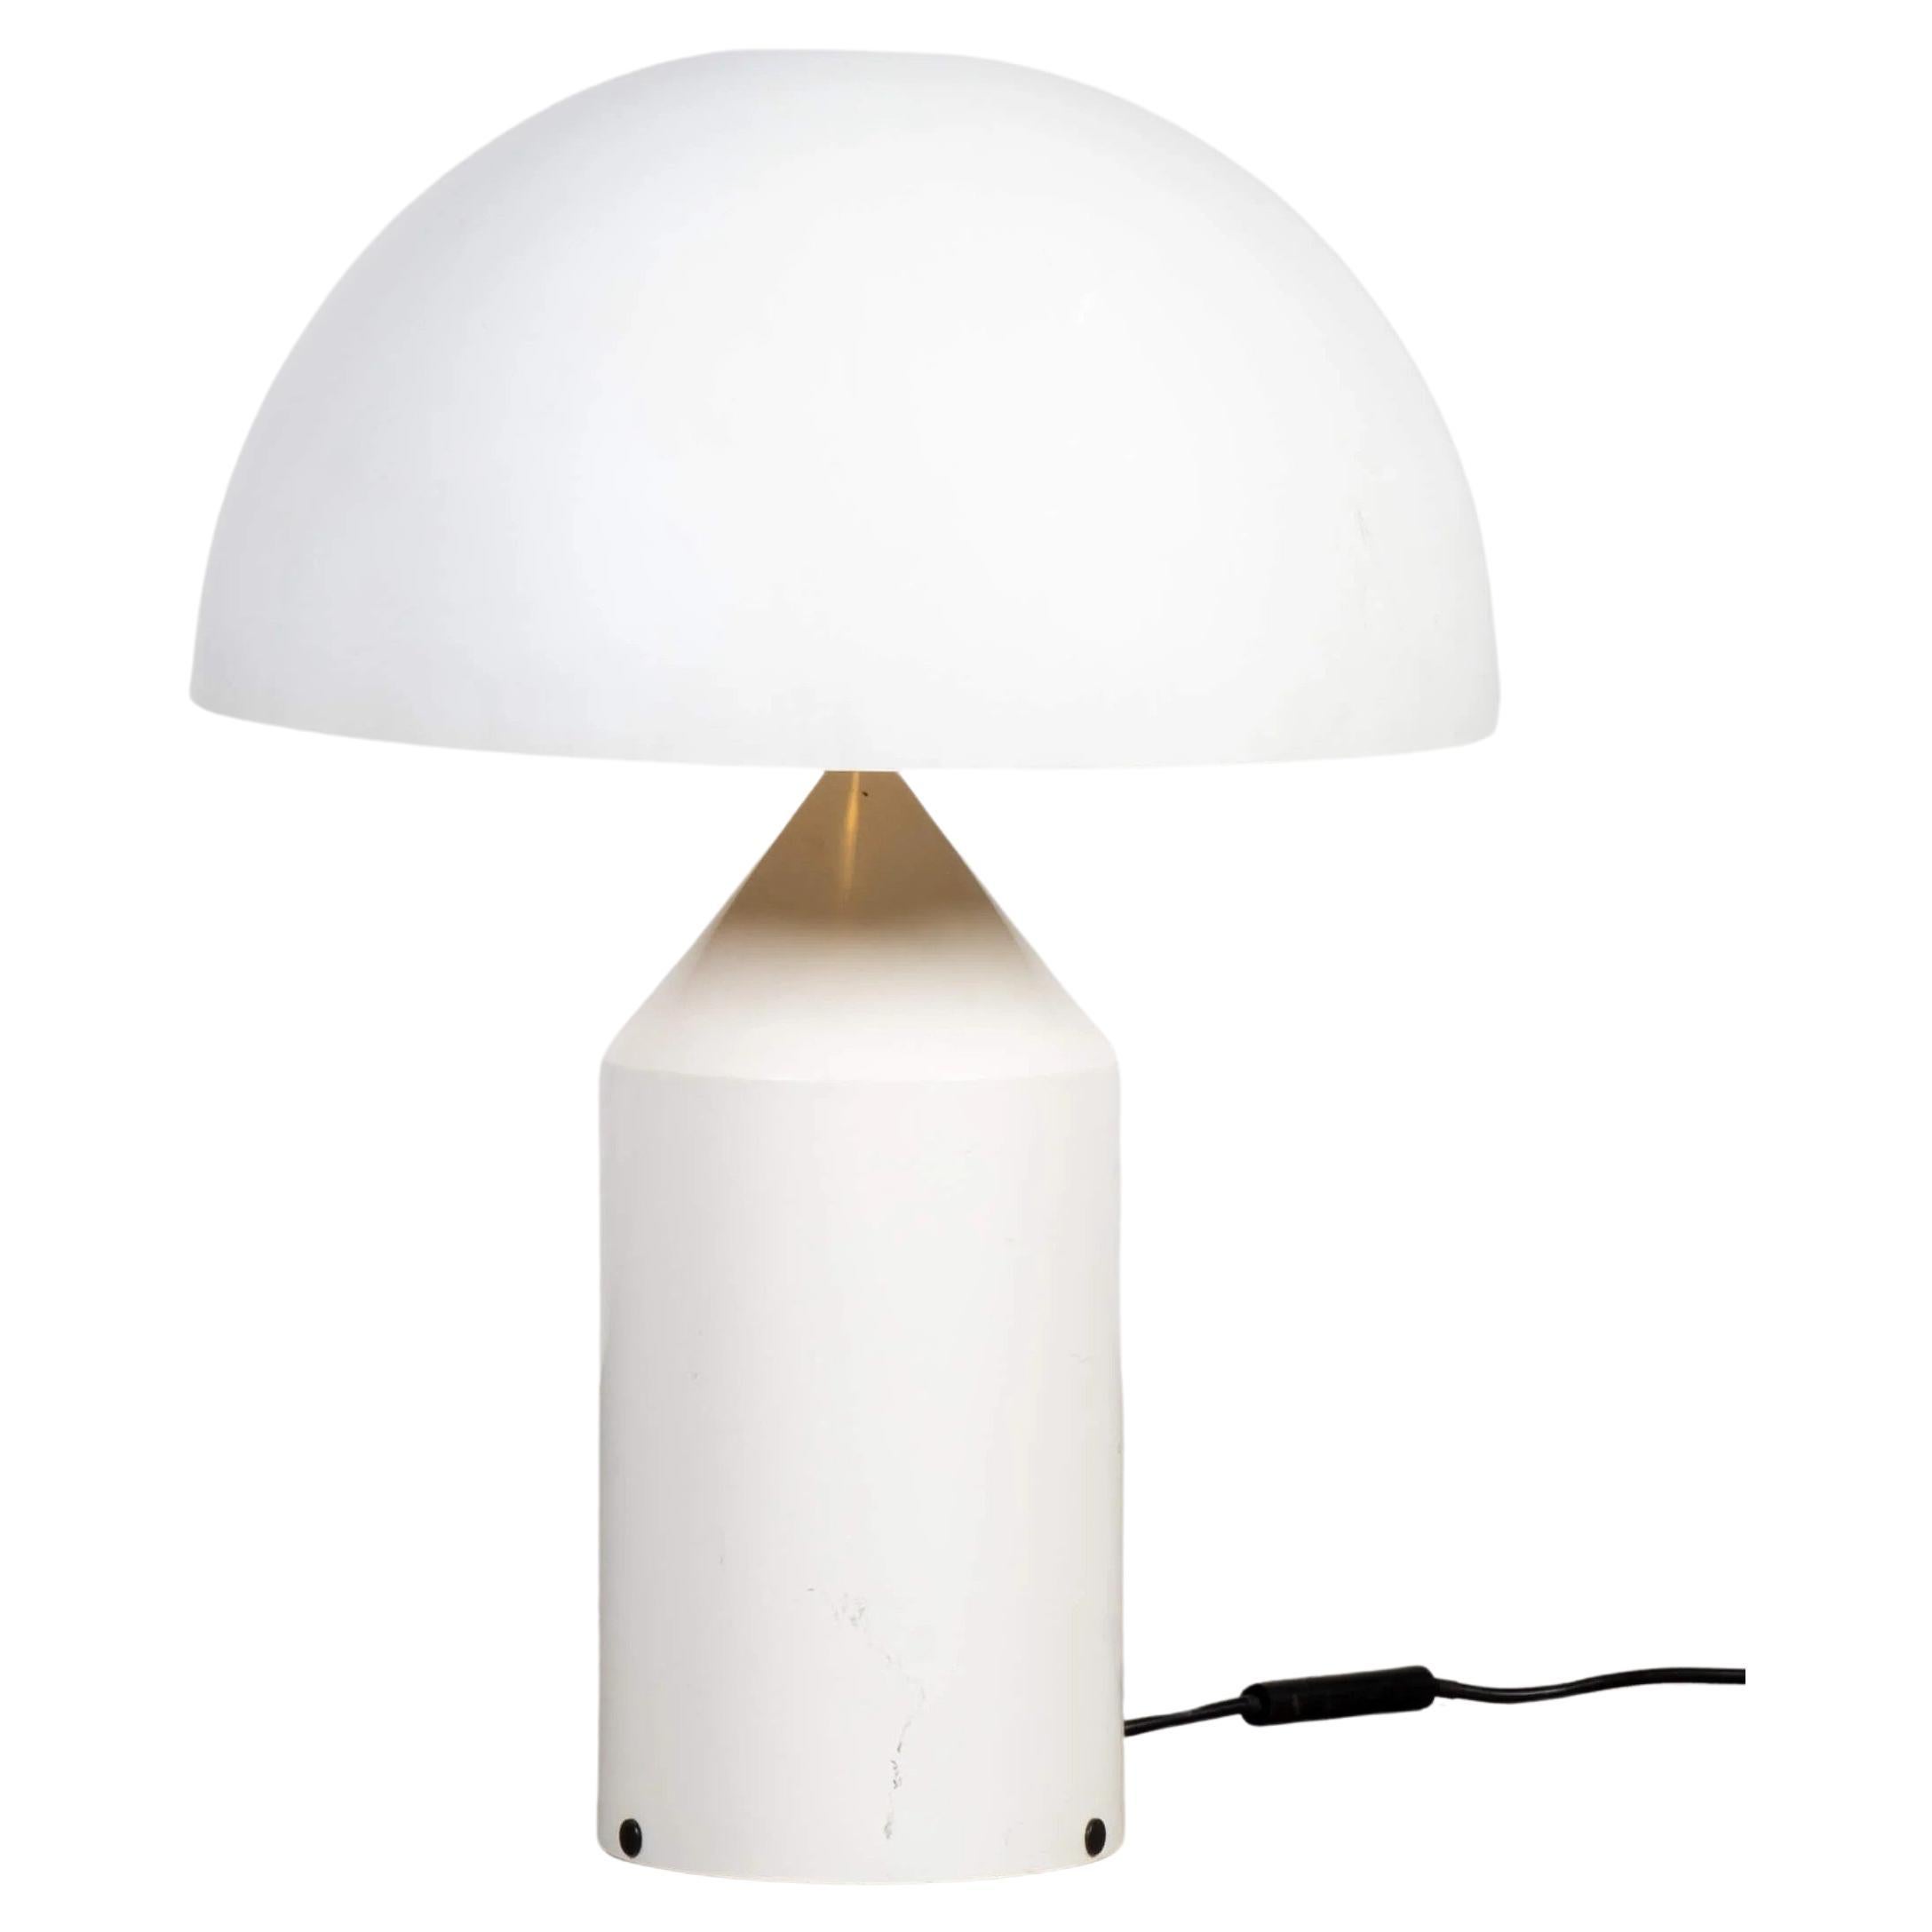 Atollo Table Lamp Model 233, White by Vico Magistretti for Oluce For Sale